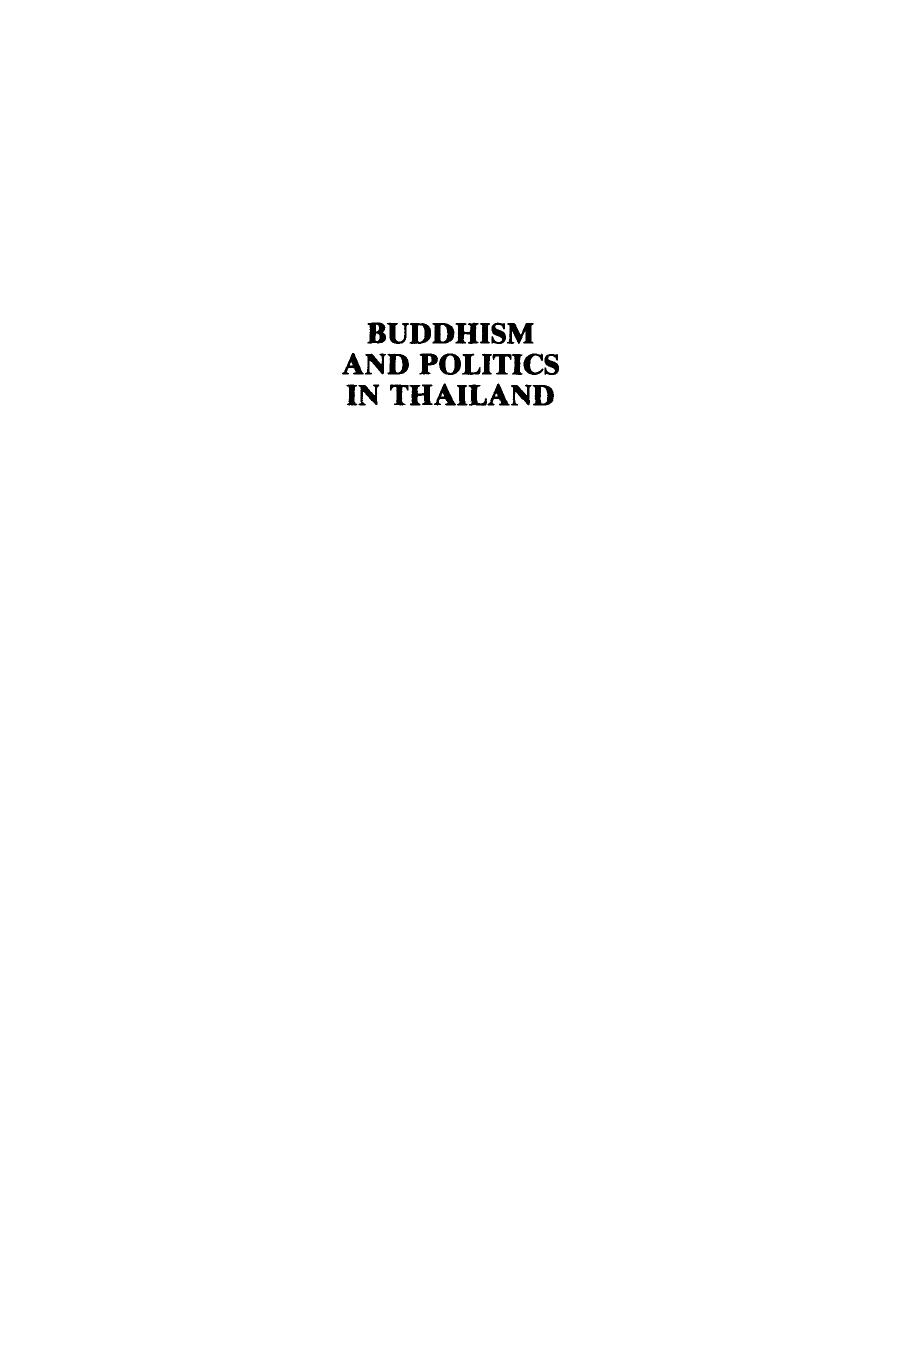 Buddhism and Politics in Thailand by Somboon Suksamran